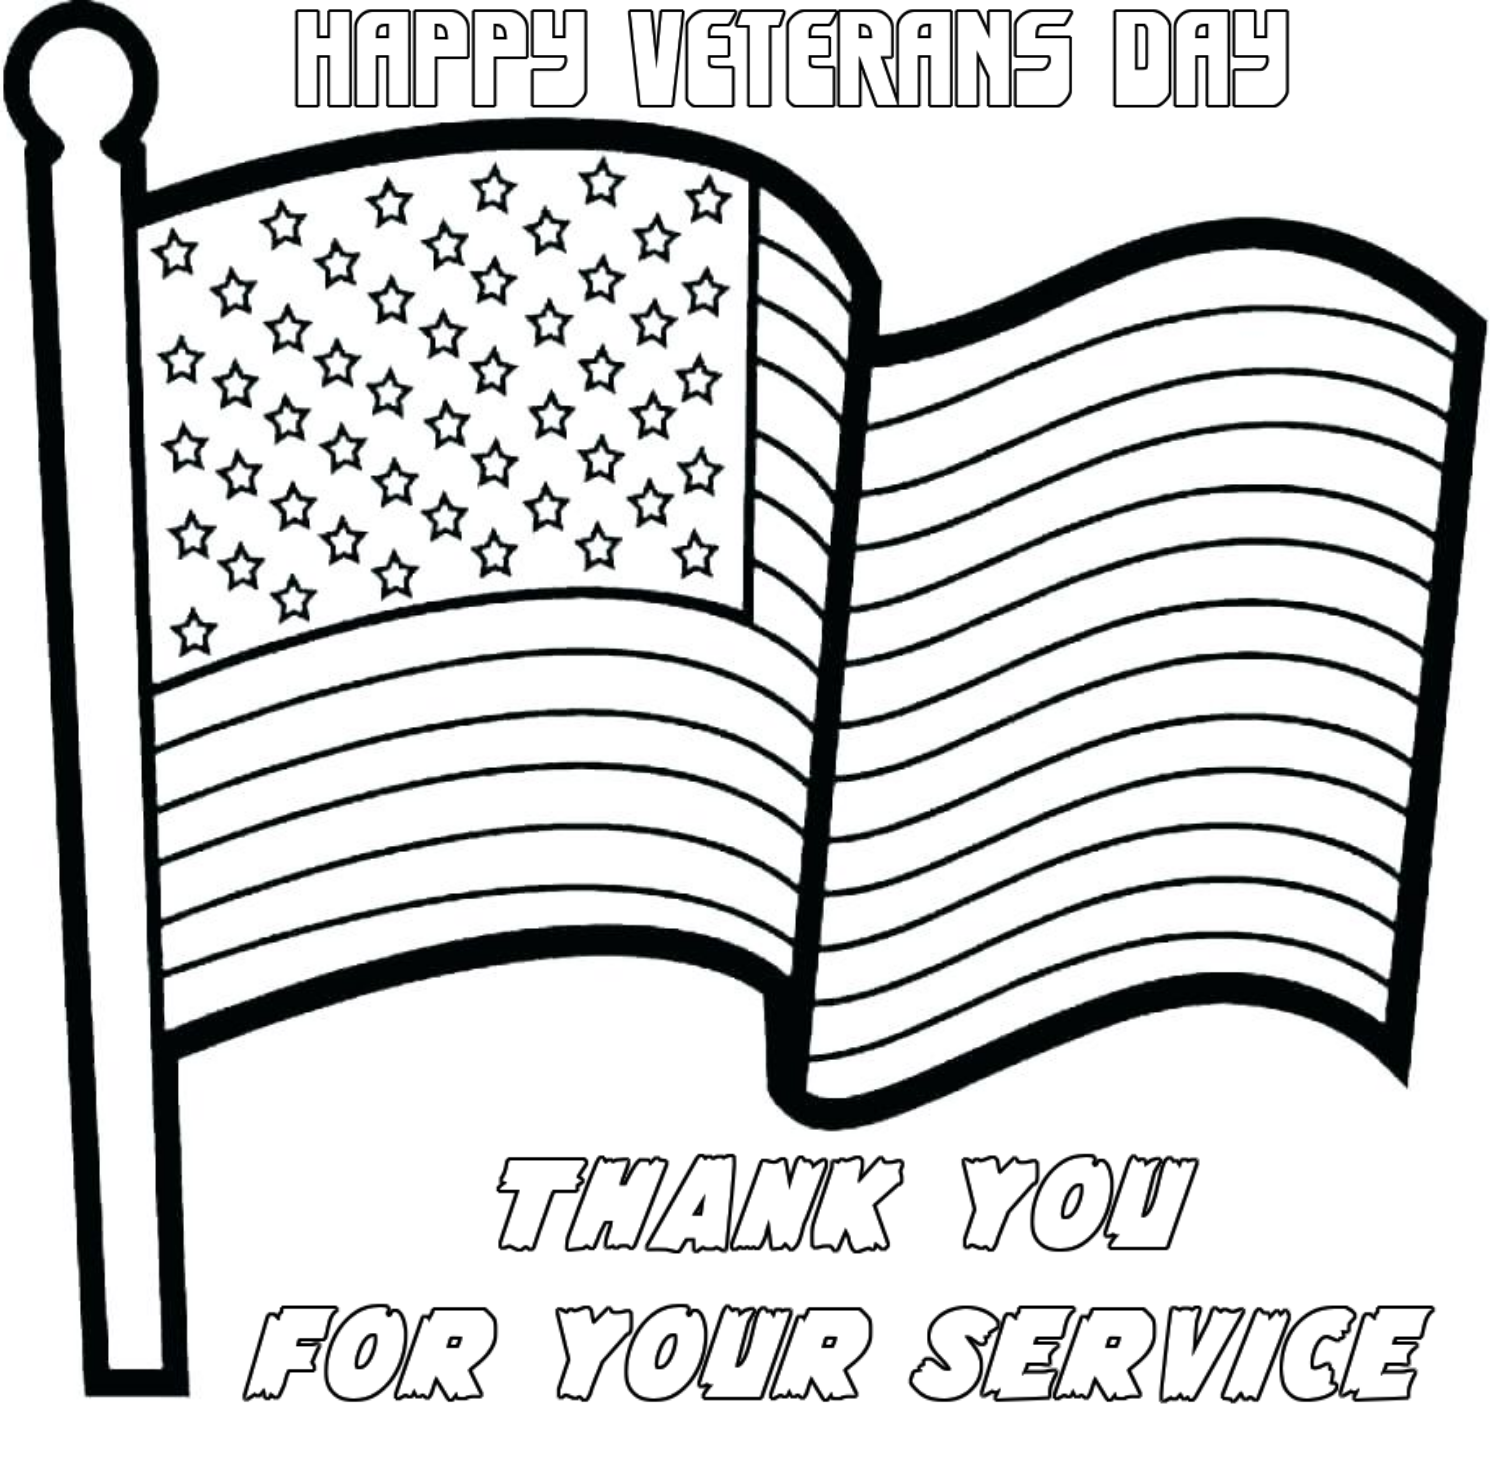 Veterans Day U.S Flag coloring pages free and printable Wallpaper